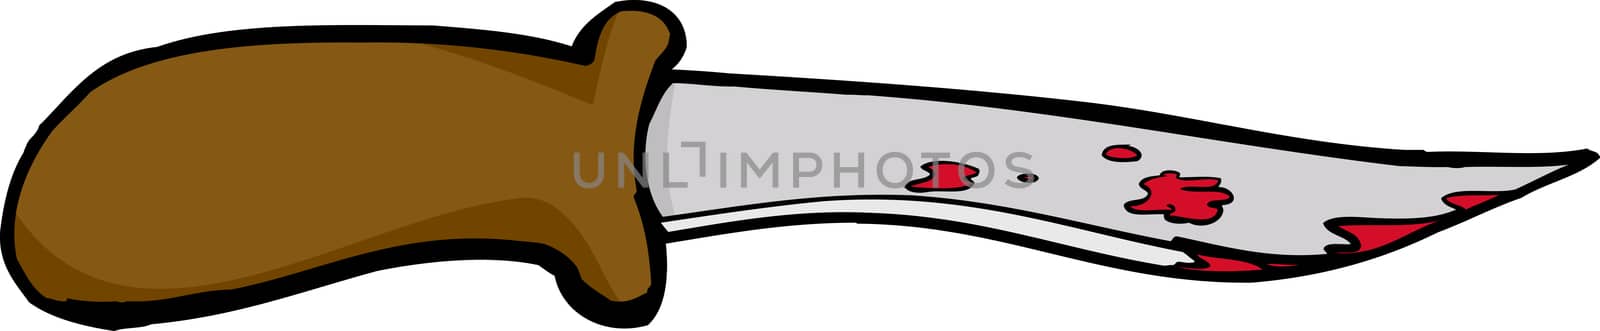 Bloody Paring Knife by TheBlackRhino